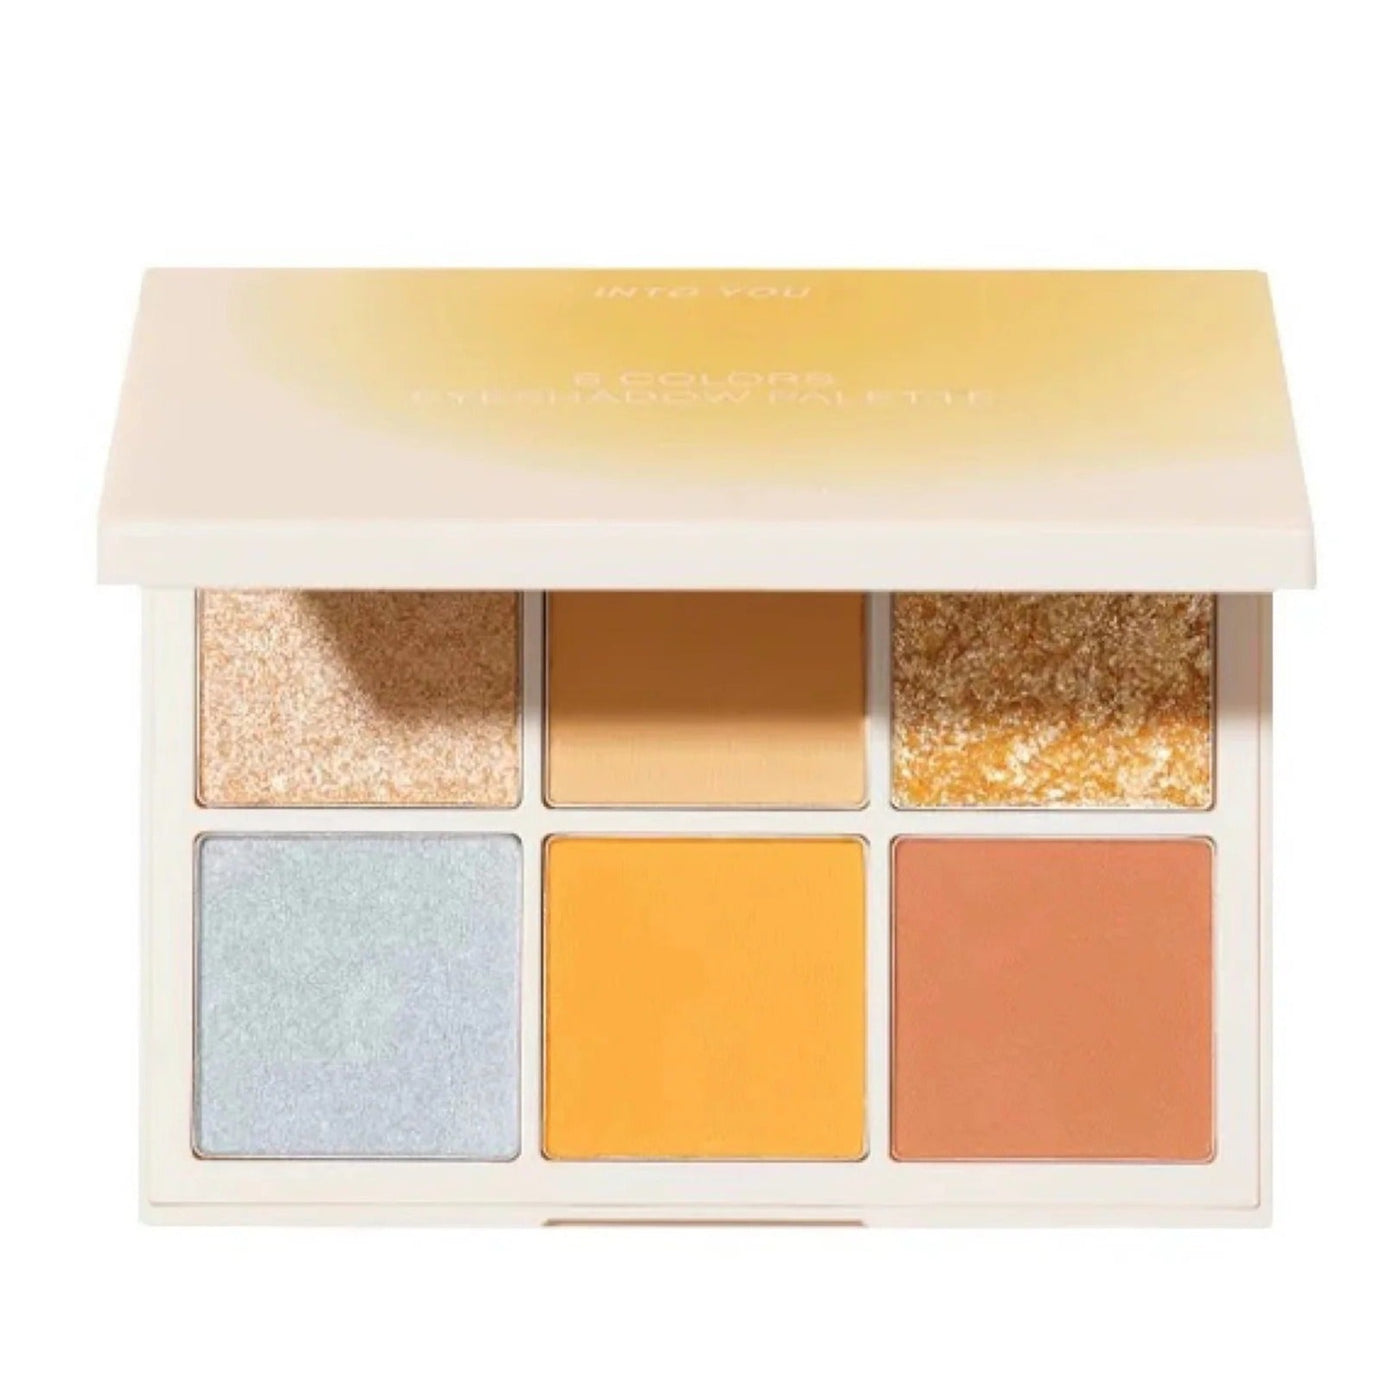 INTO YOU 6 Colors Eyeshadow Palette